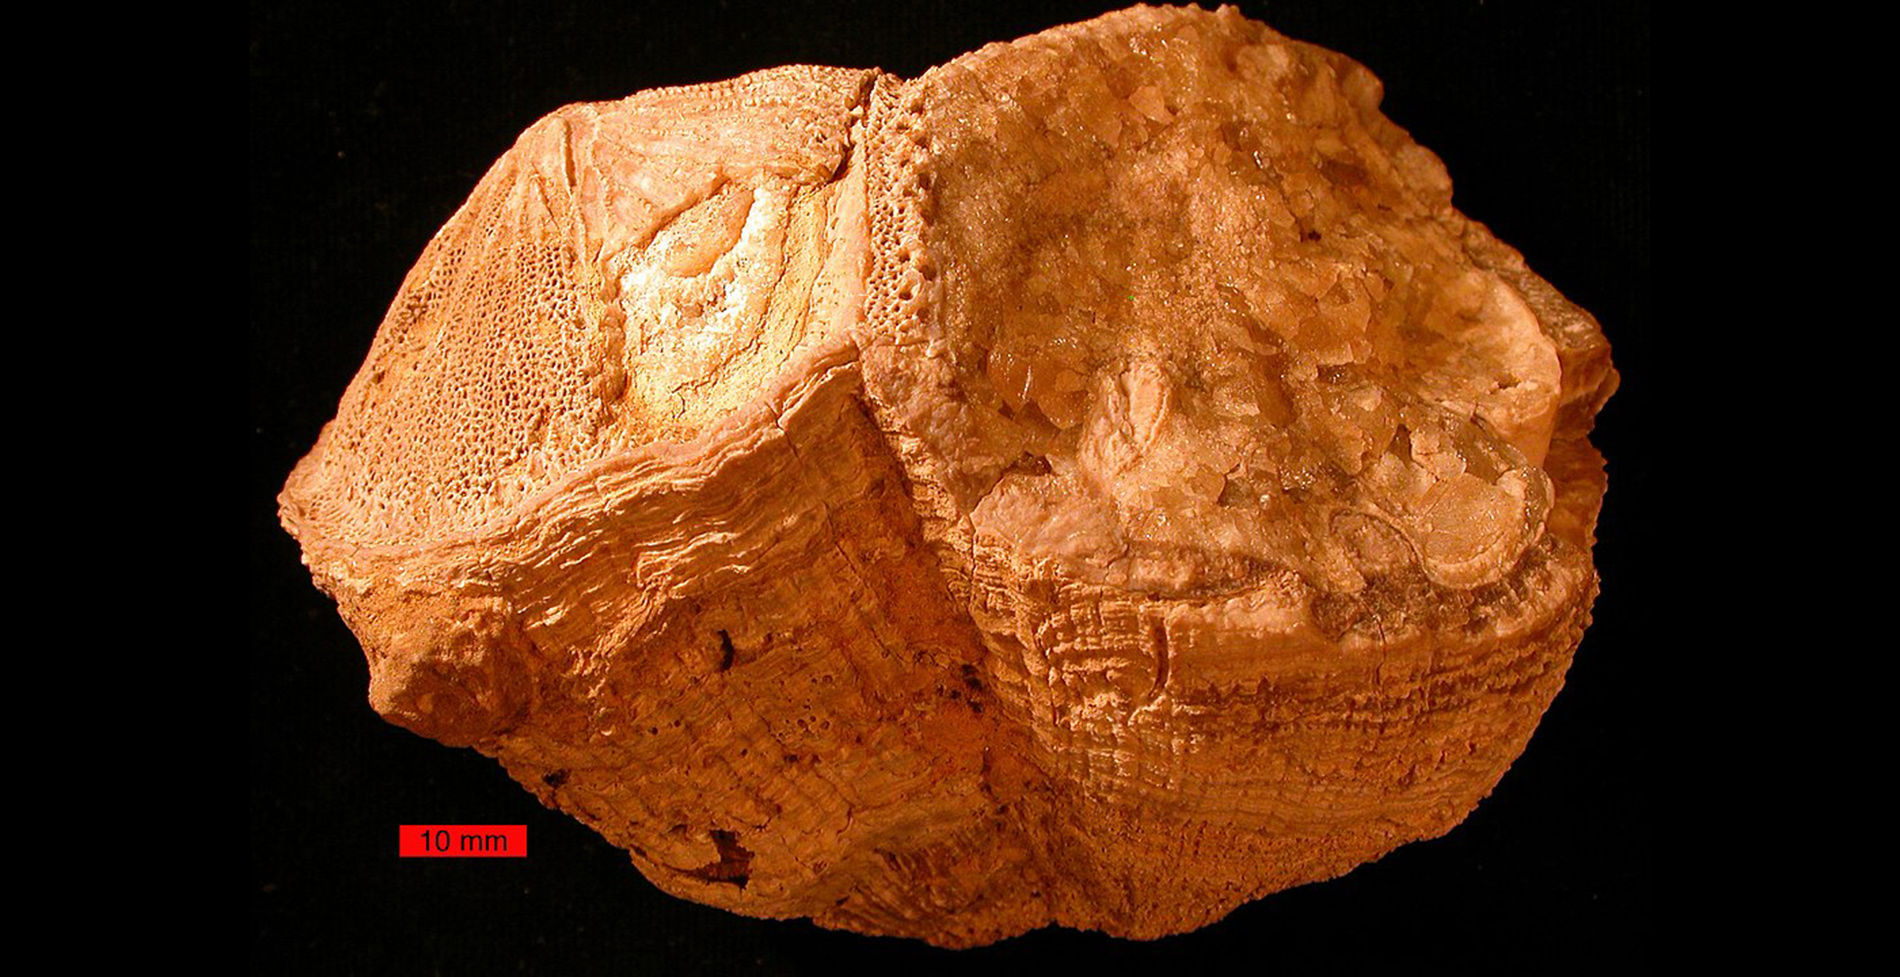 An example of a fossilized rudist bivalve from the Cretaceous Period.  Credit: Wikipedia, Wilson44691